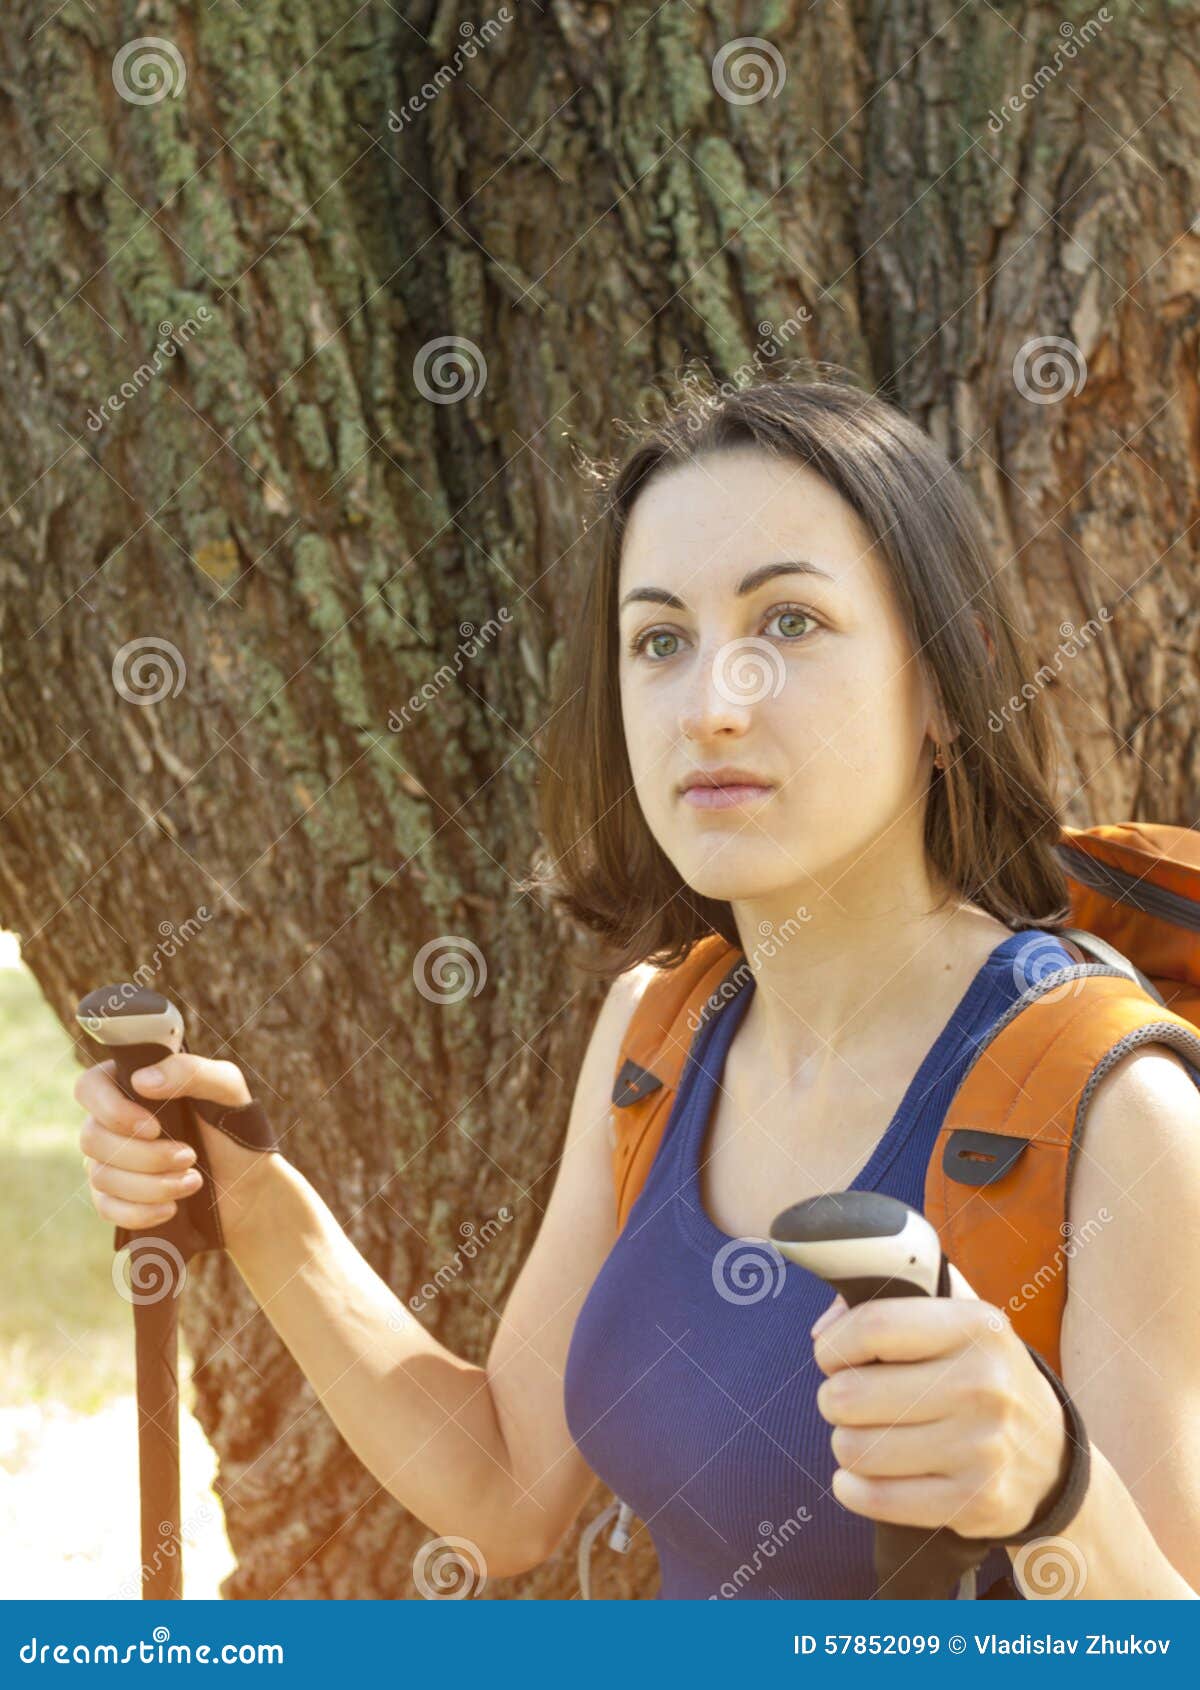 Girl with a Backpack Camping Trip. Stock Image - Image of holiday ...